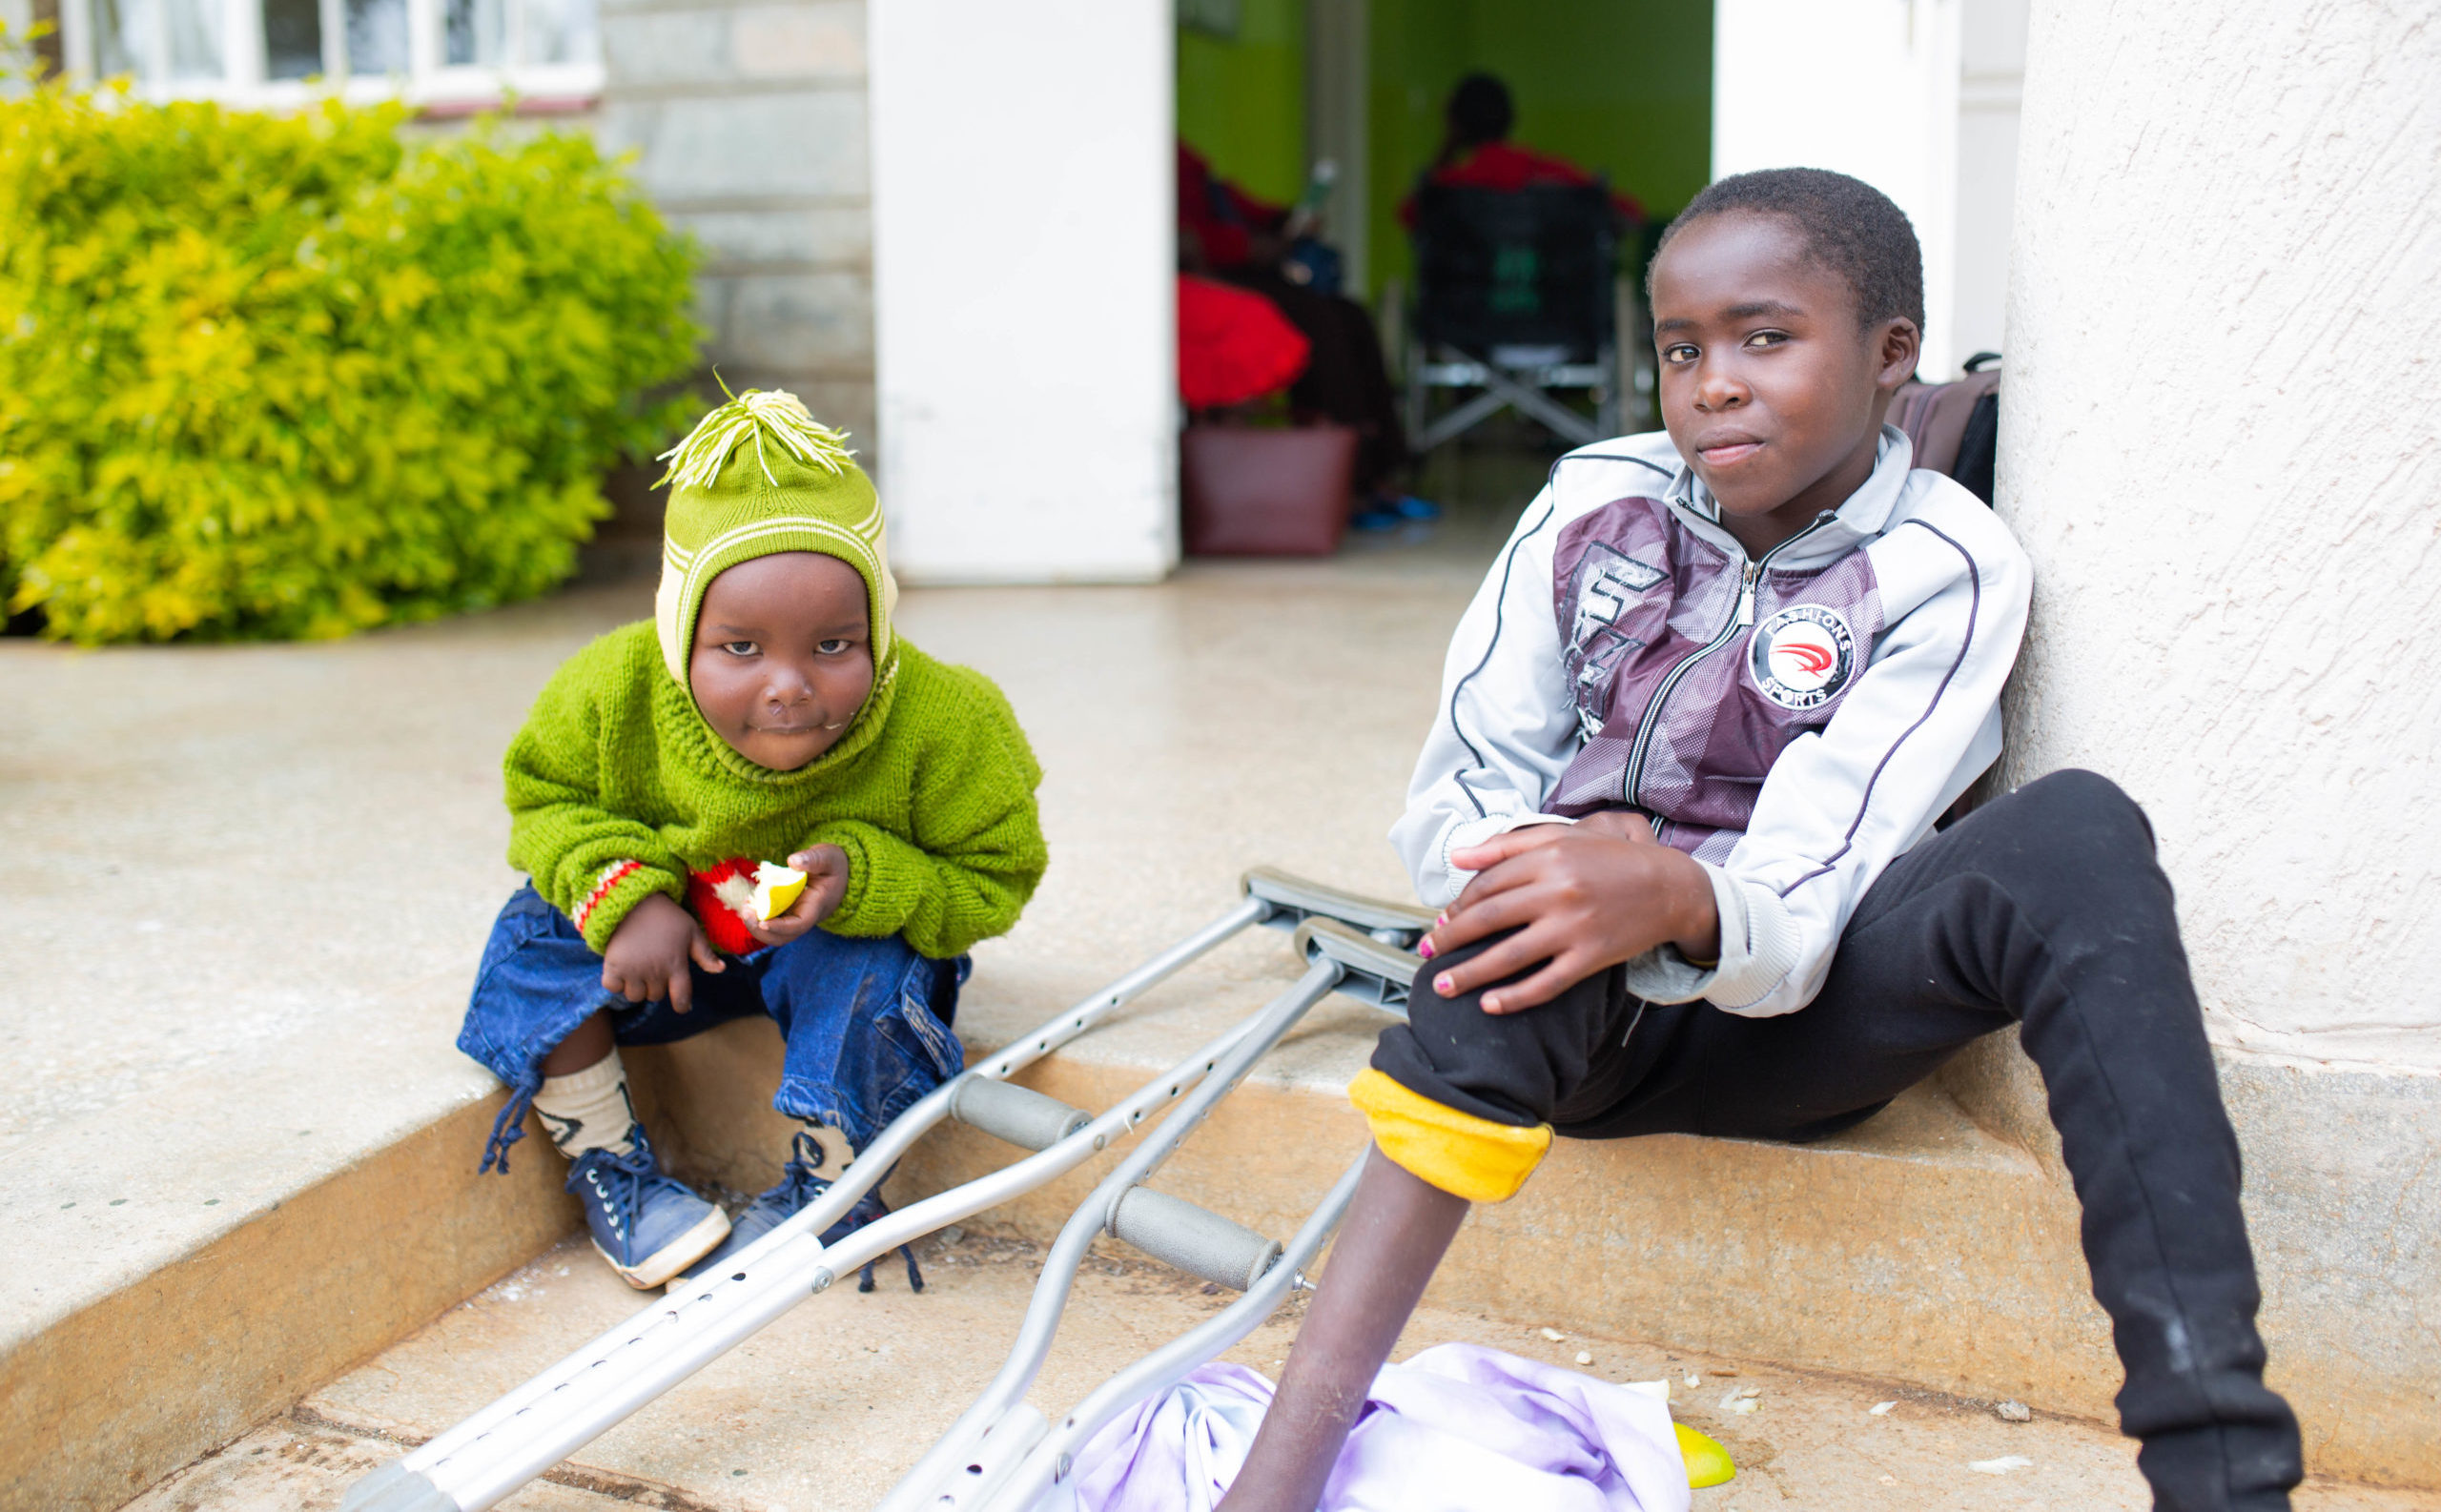 The Need for Children’s Medical Care in Kenya